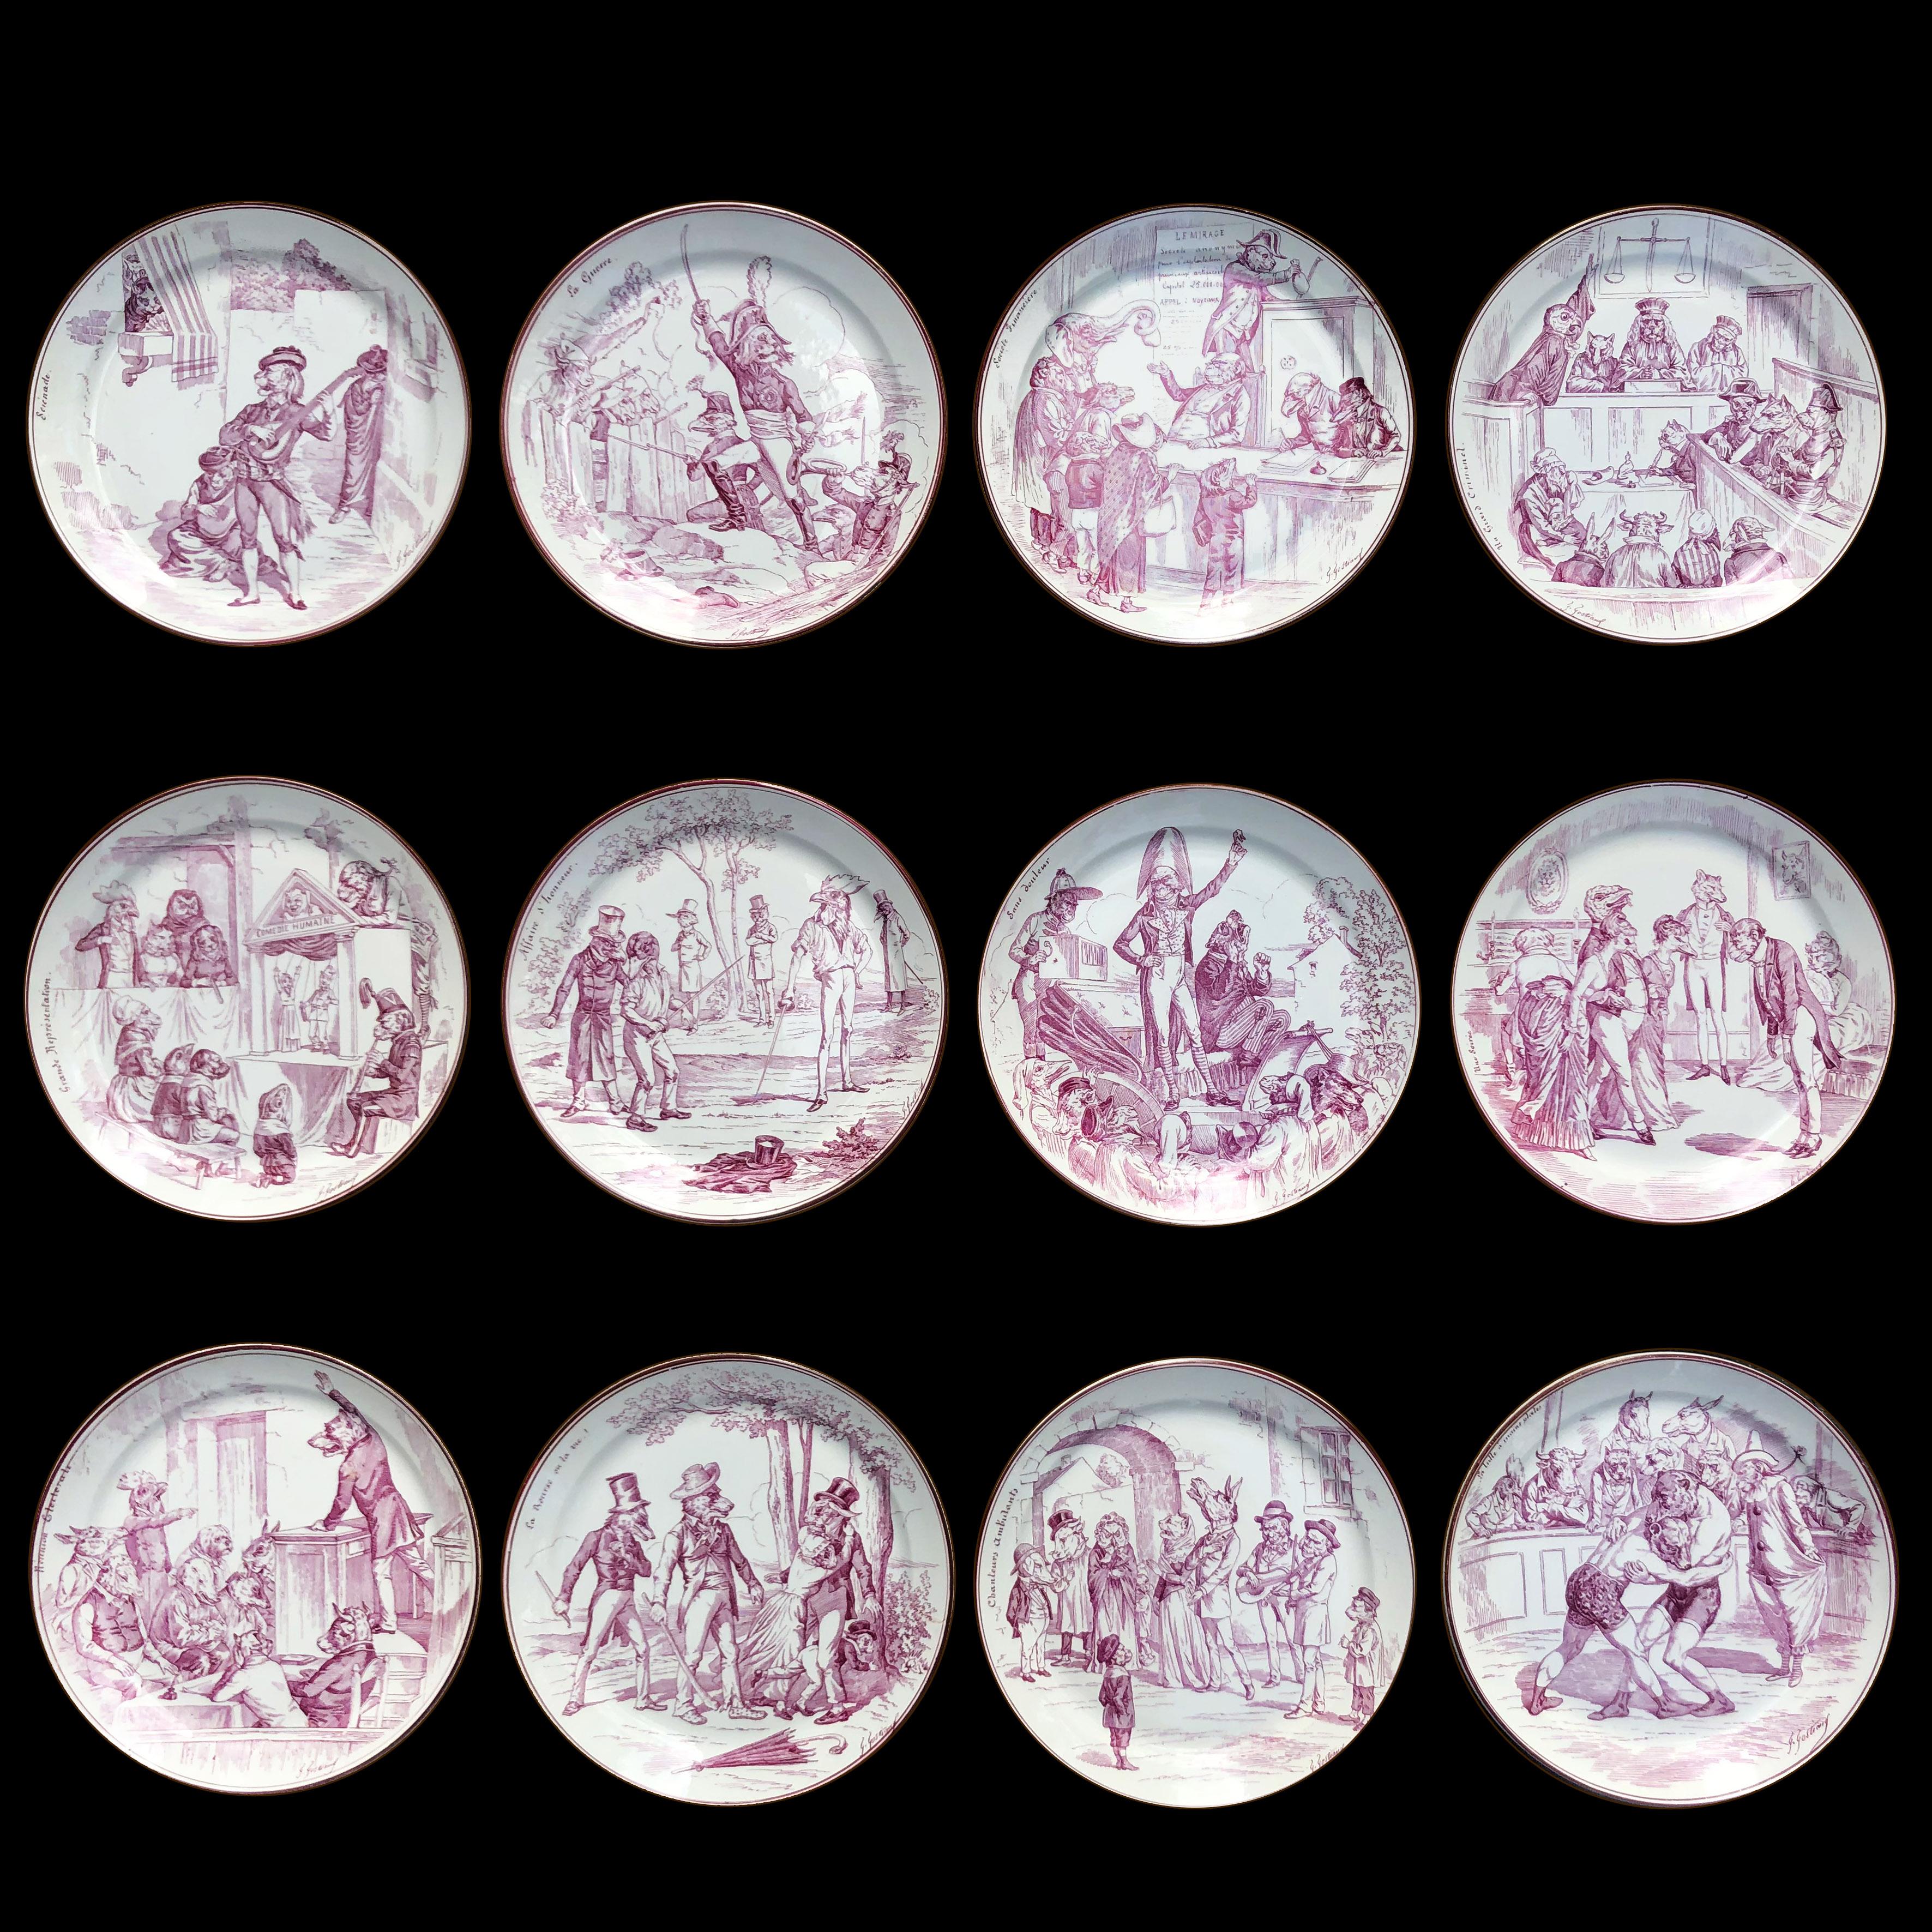 Very rare set of 12 earthenware illustrated plates with ivory background decorated with pink fuchsia designed personified animals realizing various activities and a sepia orange filet on the rim.
Size: Diameter of each plate 21.5 cm 

List of the